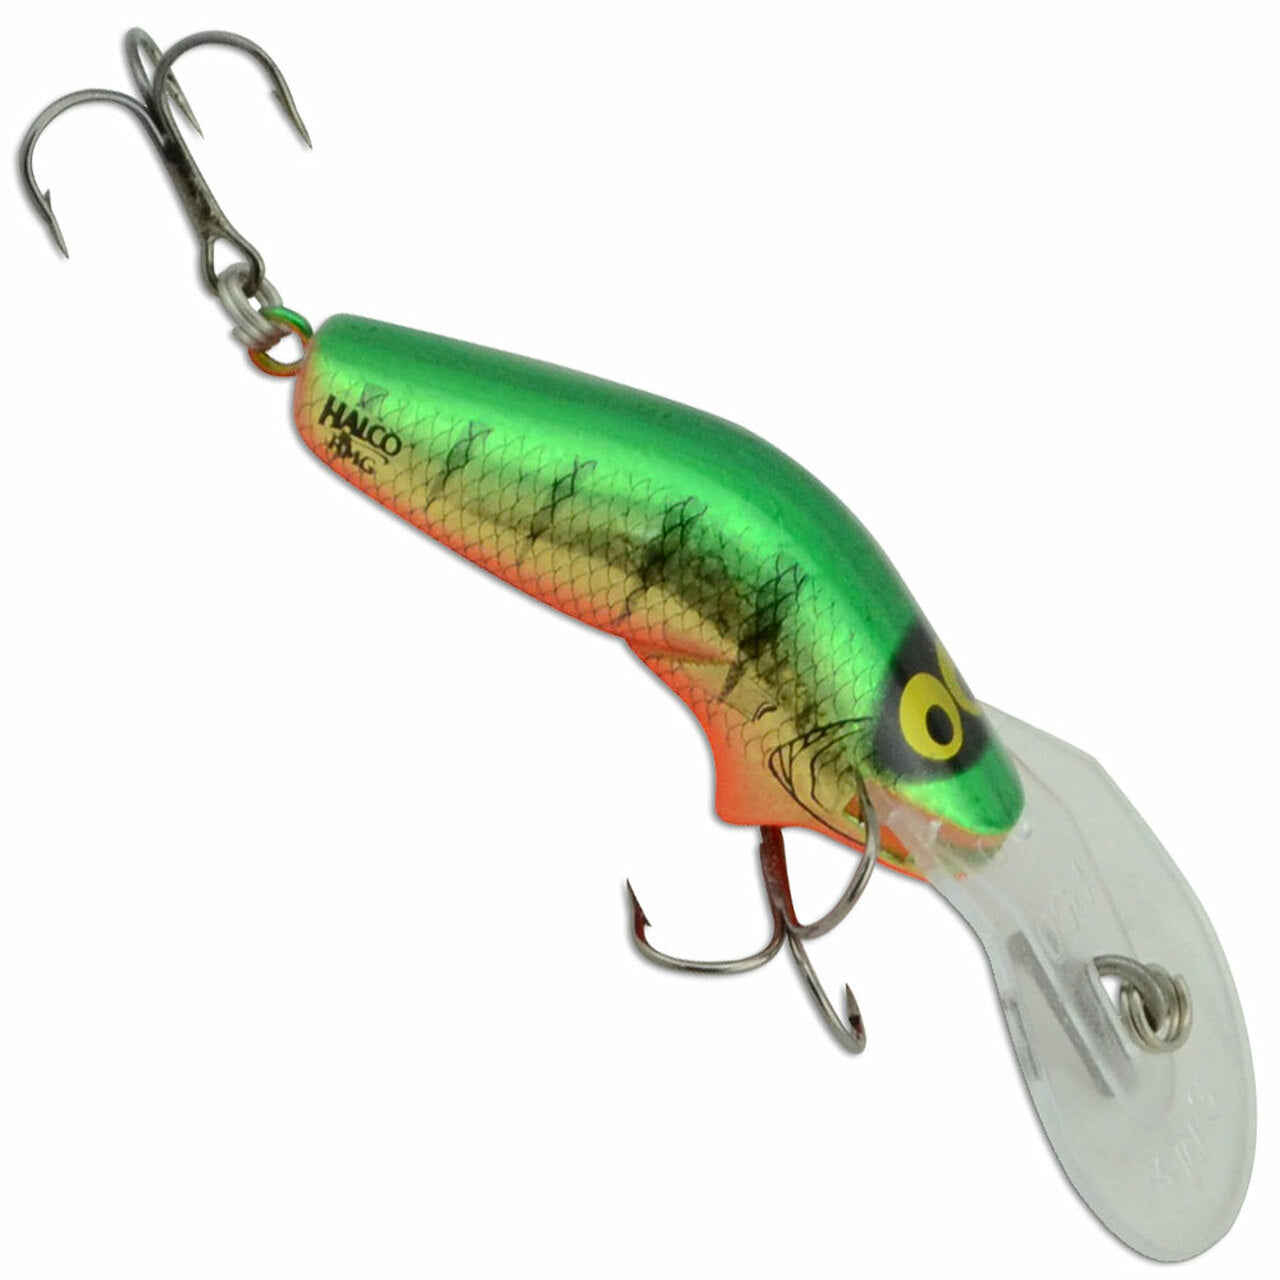 Poltergeist 50 RMG Lure 3m+ - GOLDEN GREEN - Mansfield Hunting & Fishing - Products to prepare for Corona Virus